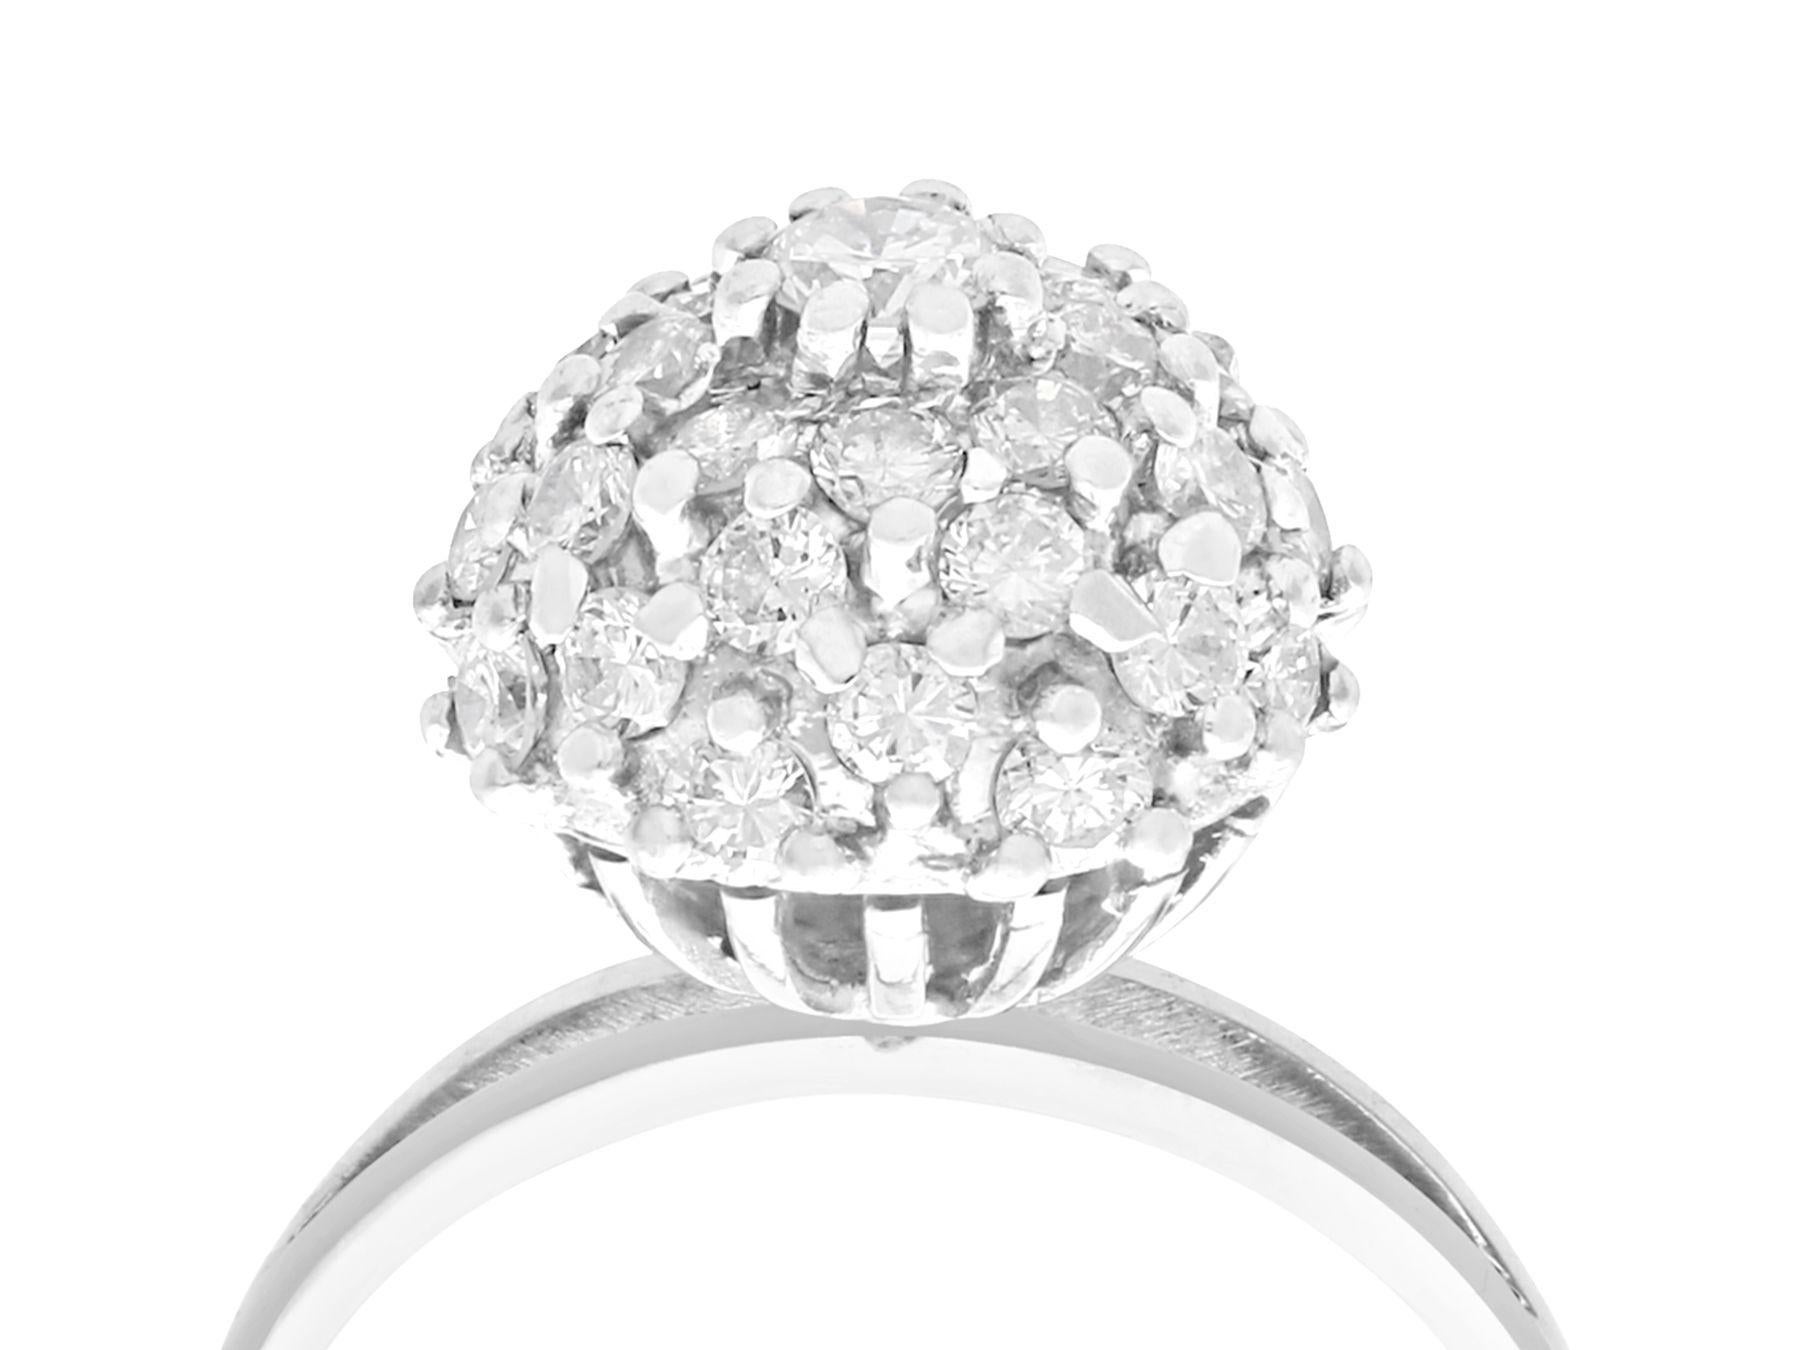 A fine and impressive vintage 1.07 carat diamond and 18 karat white gold cluster ring in the Art Deco style; part of our diverse vintage jewelry collections.

This fine and impressive vintage 1950s diamond cluster ring has been crafted in 18k white